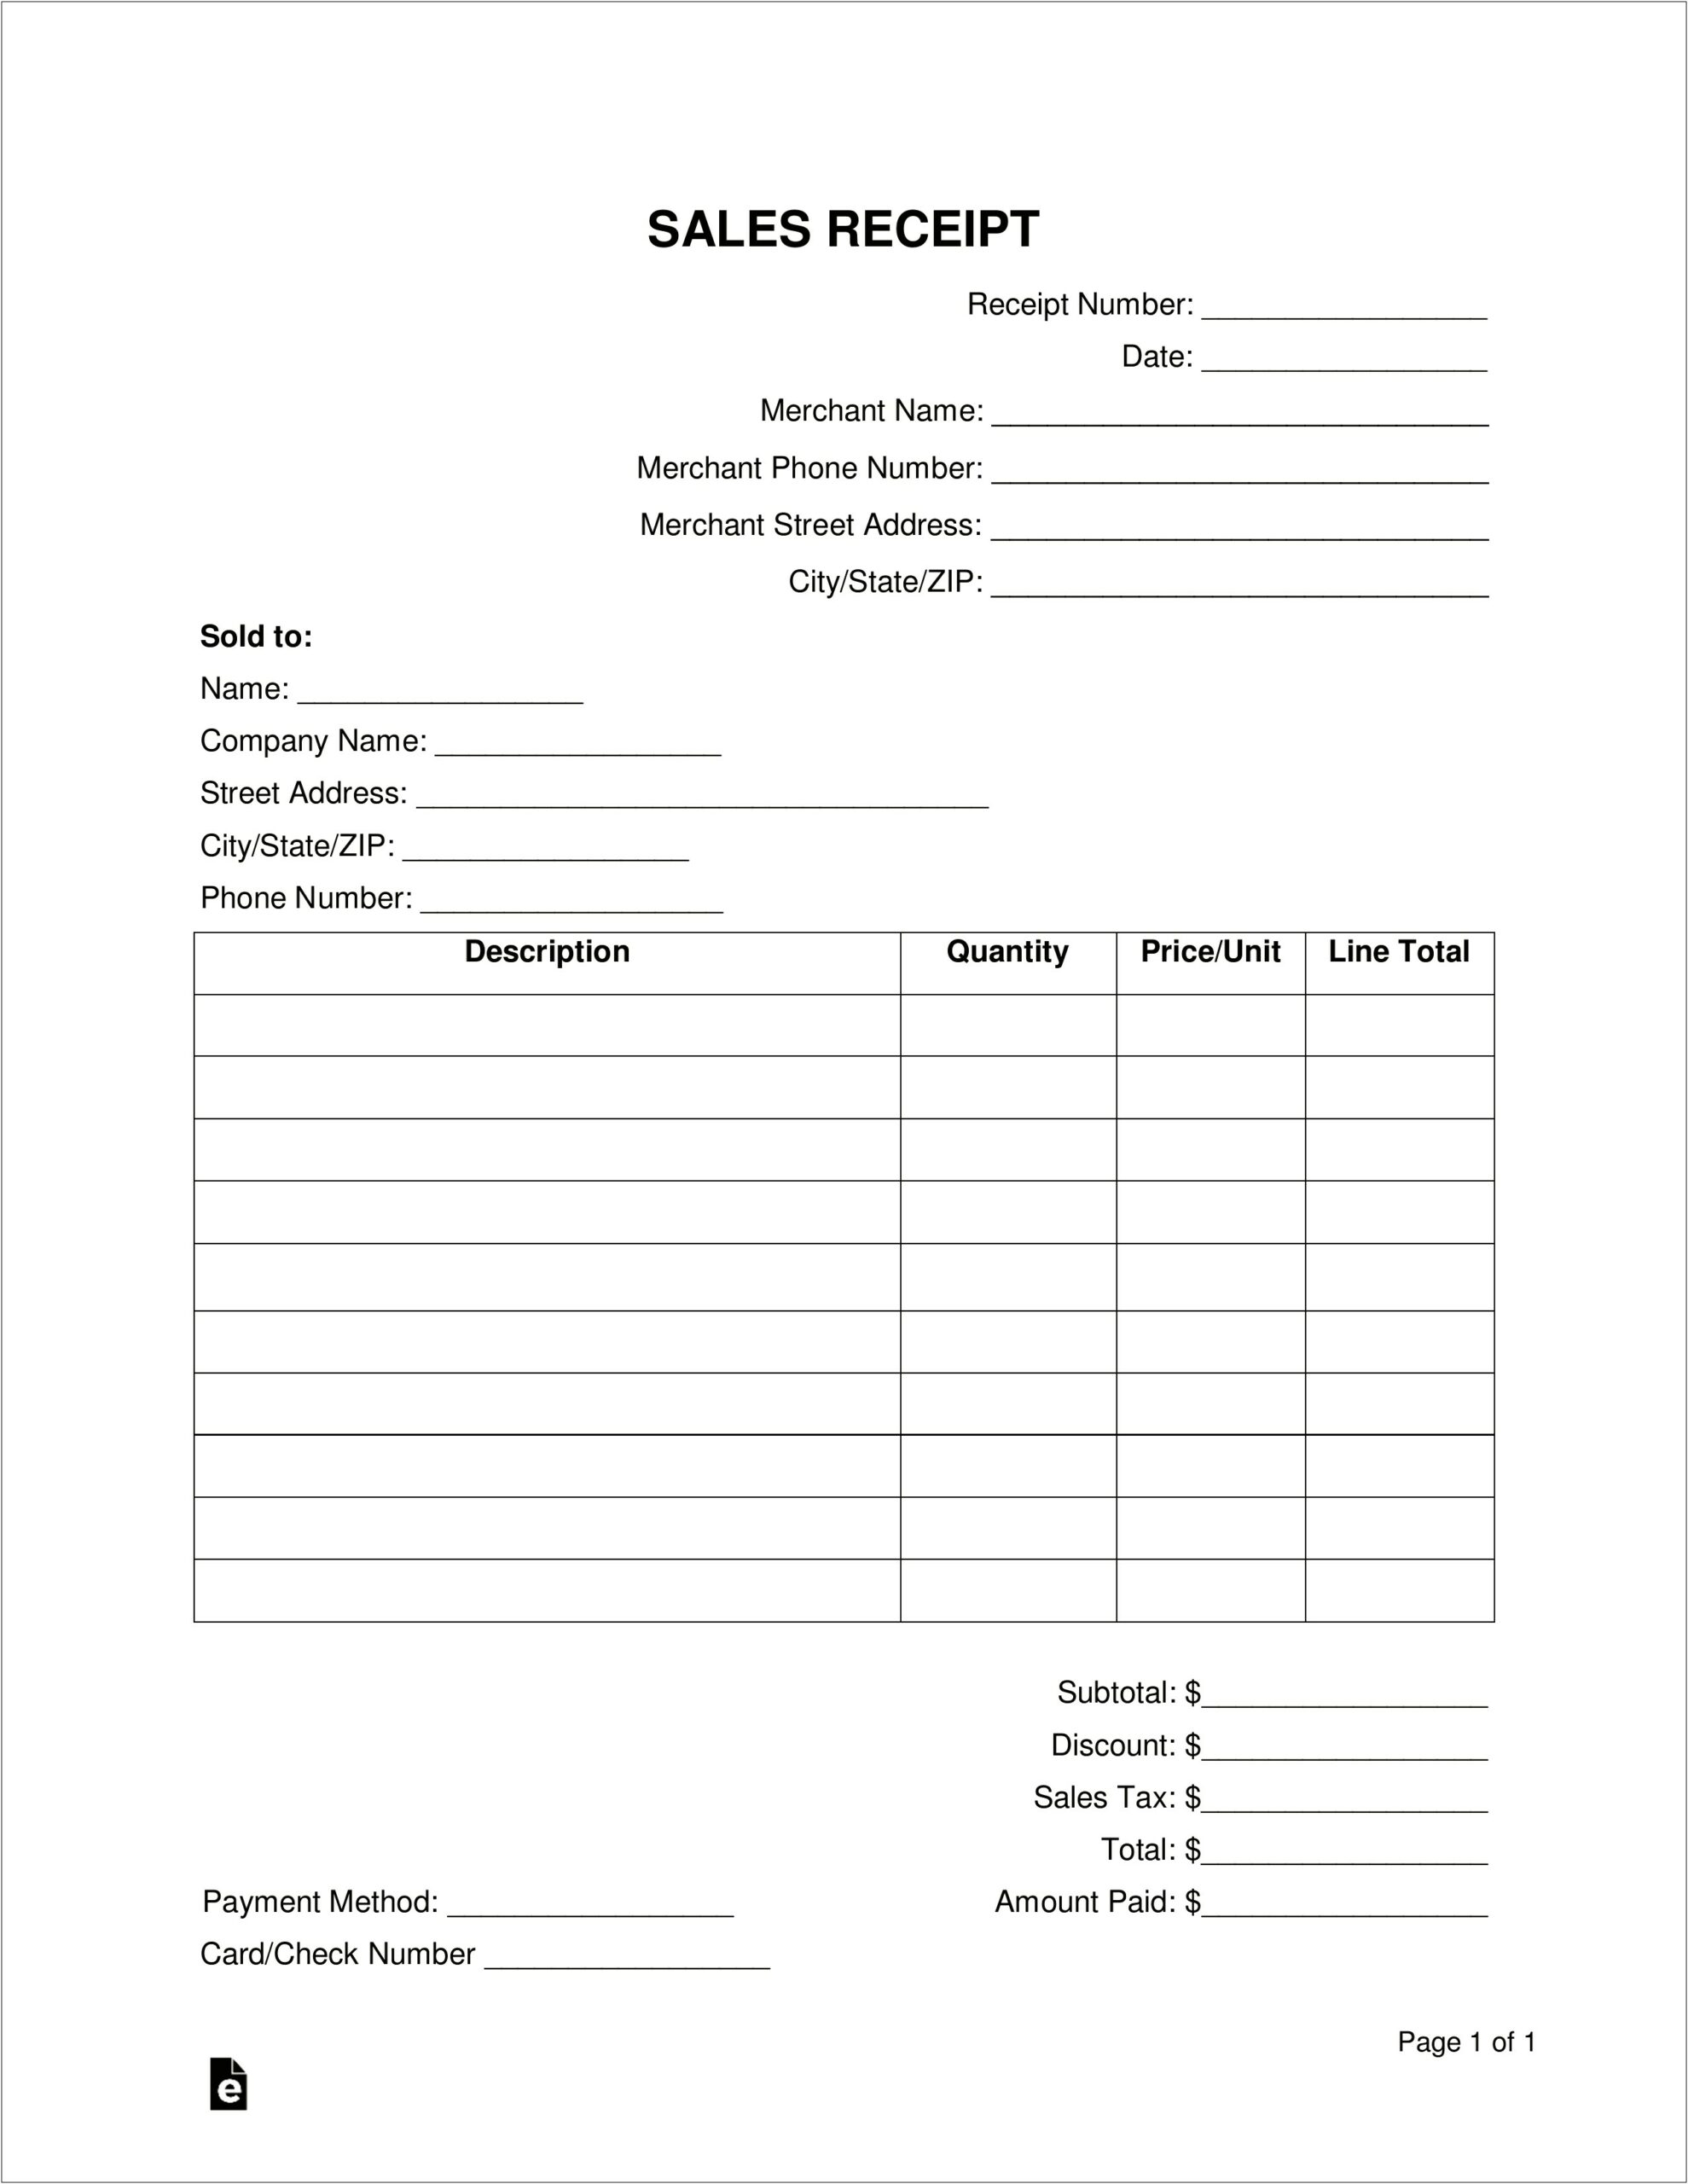 Free Sales Receipt Templates For Word